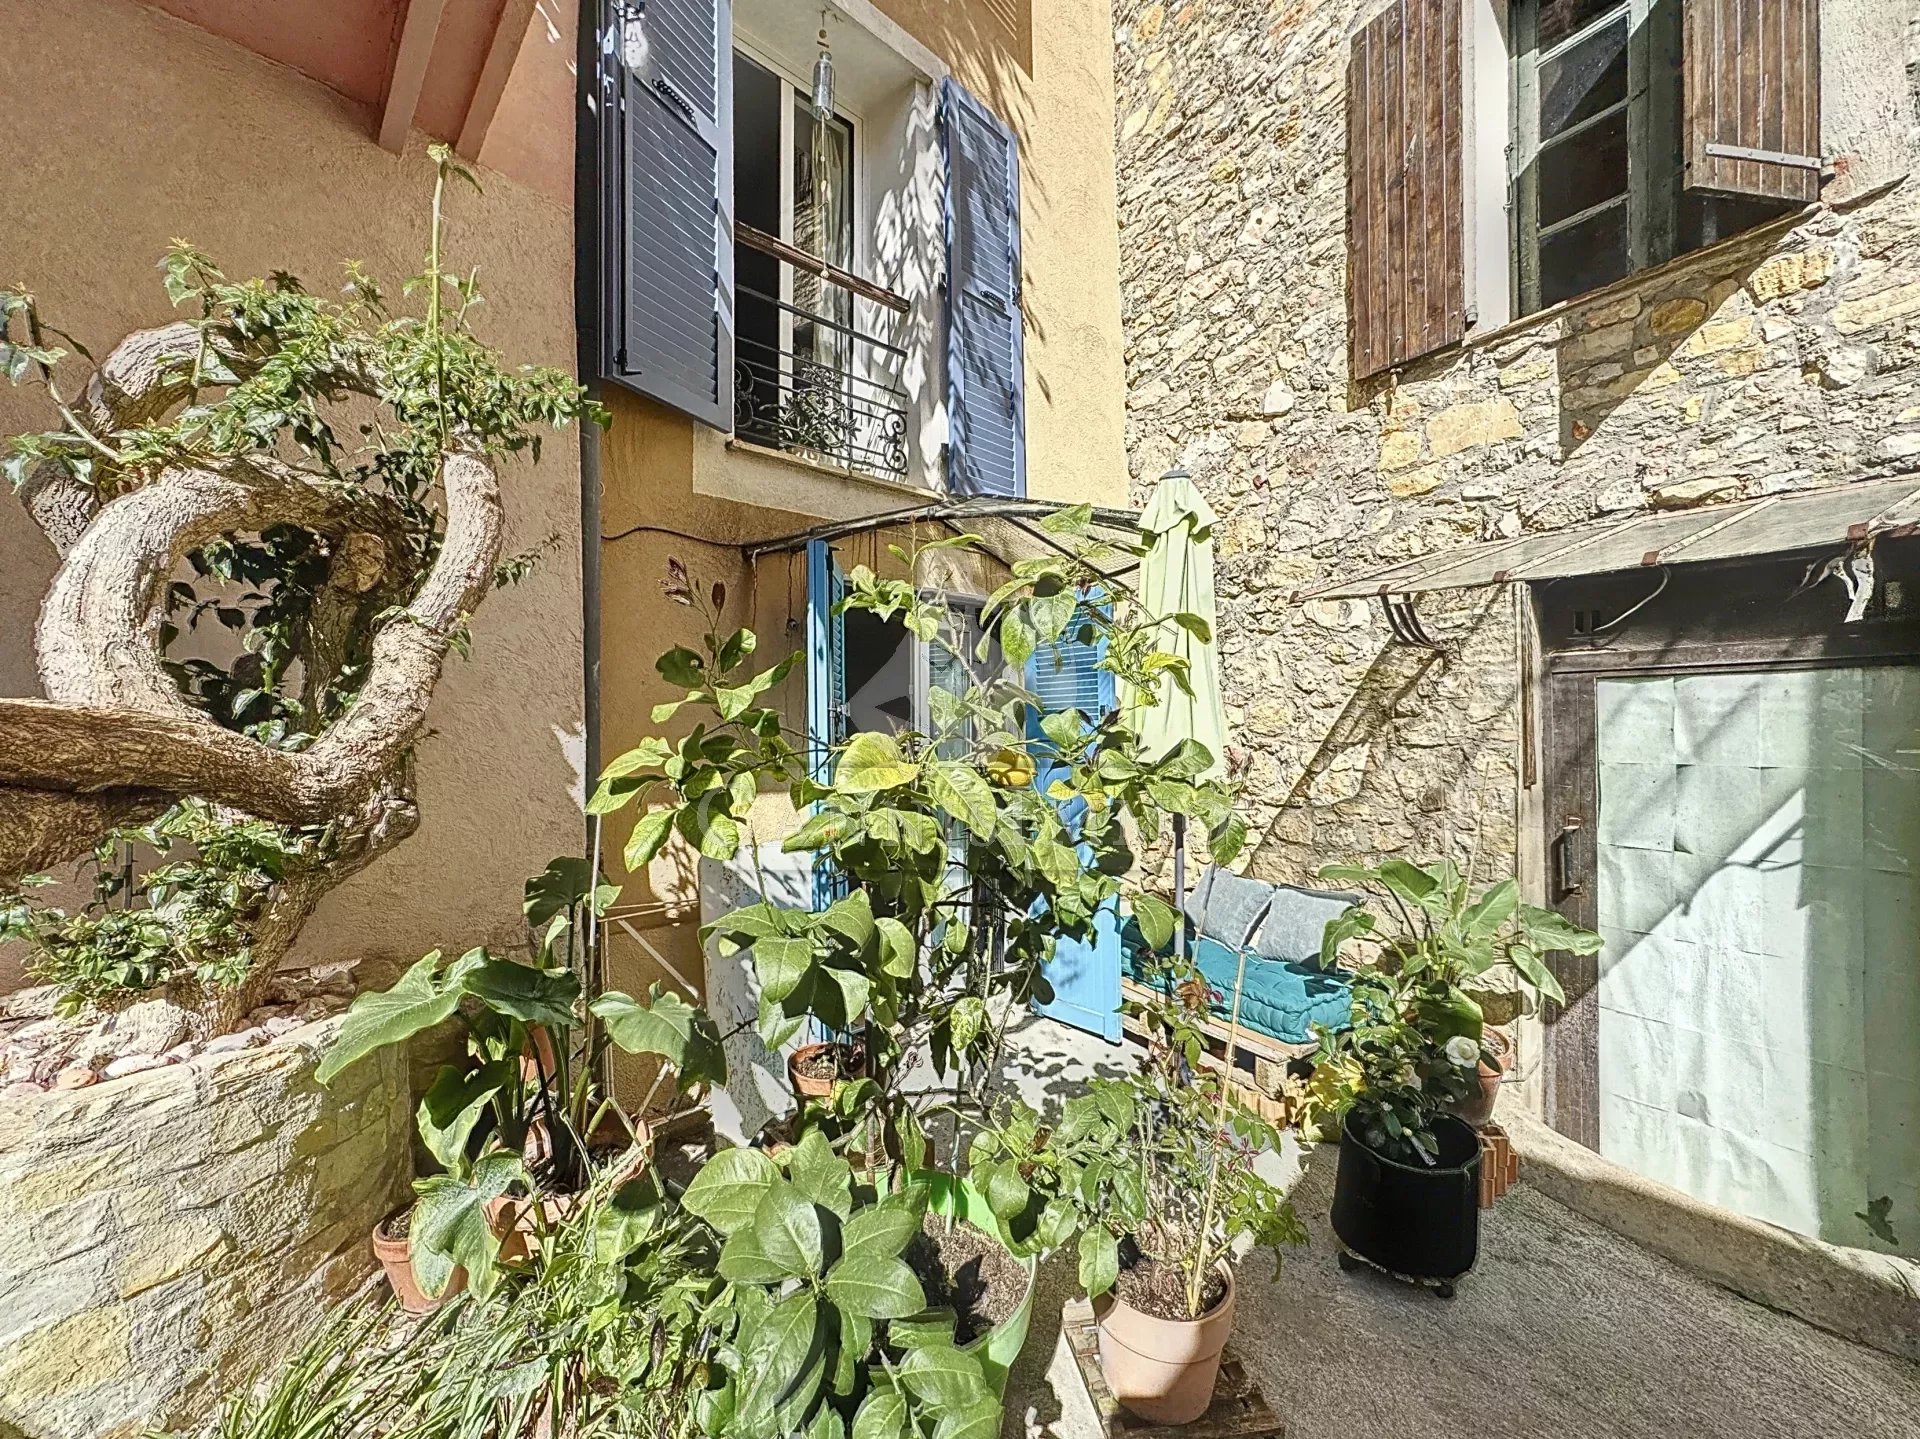 DETACHED HOUSE 3 BEDROOMS - OLD LE CANNET